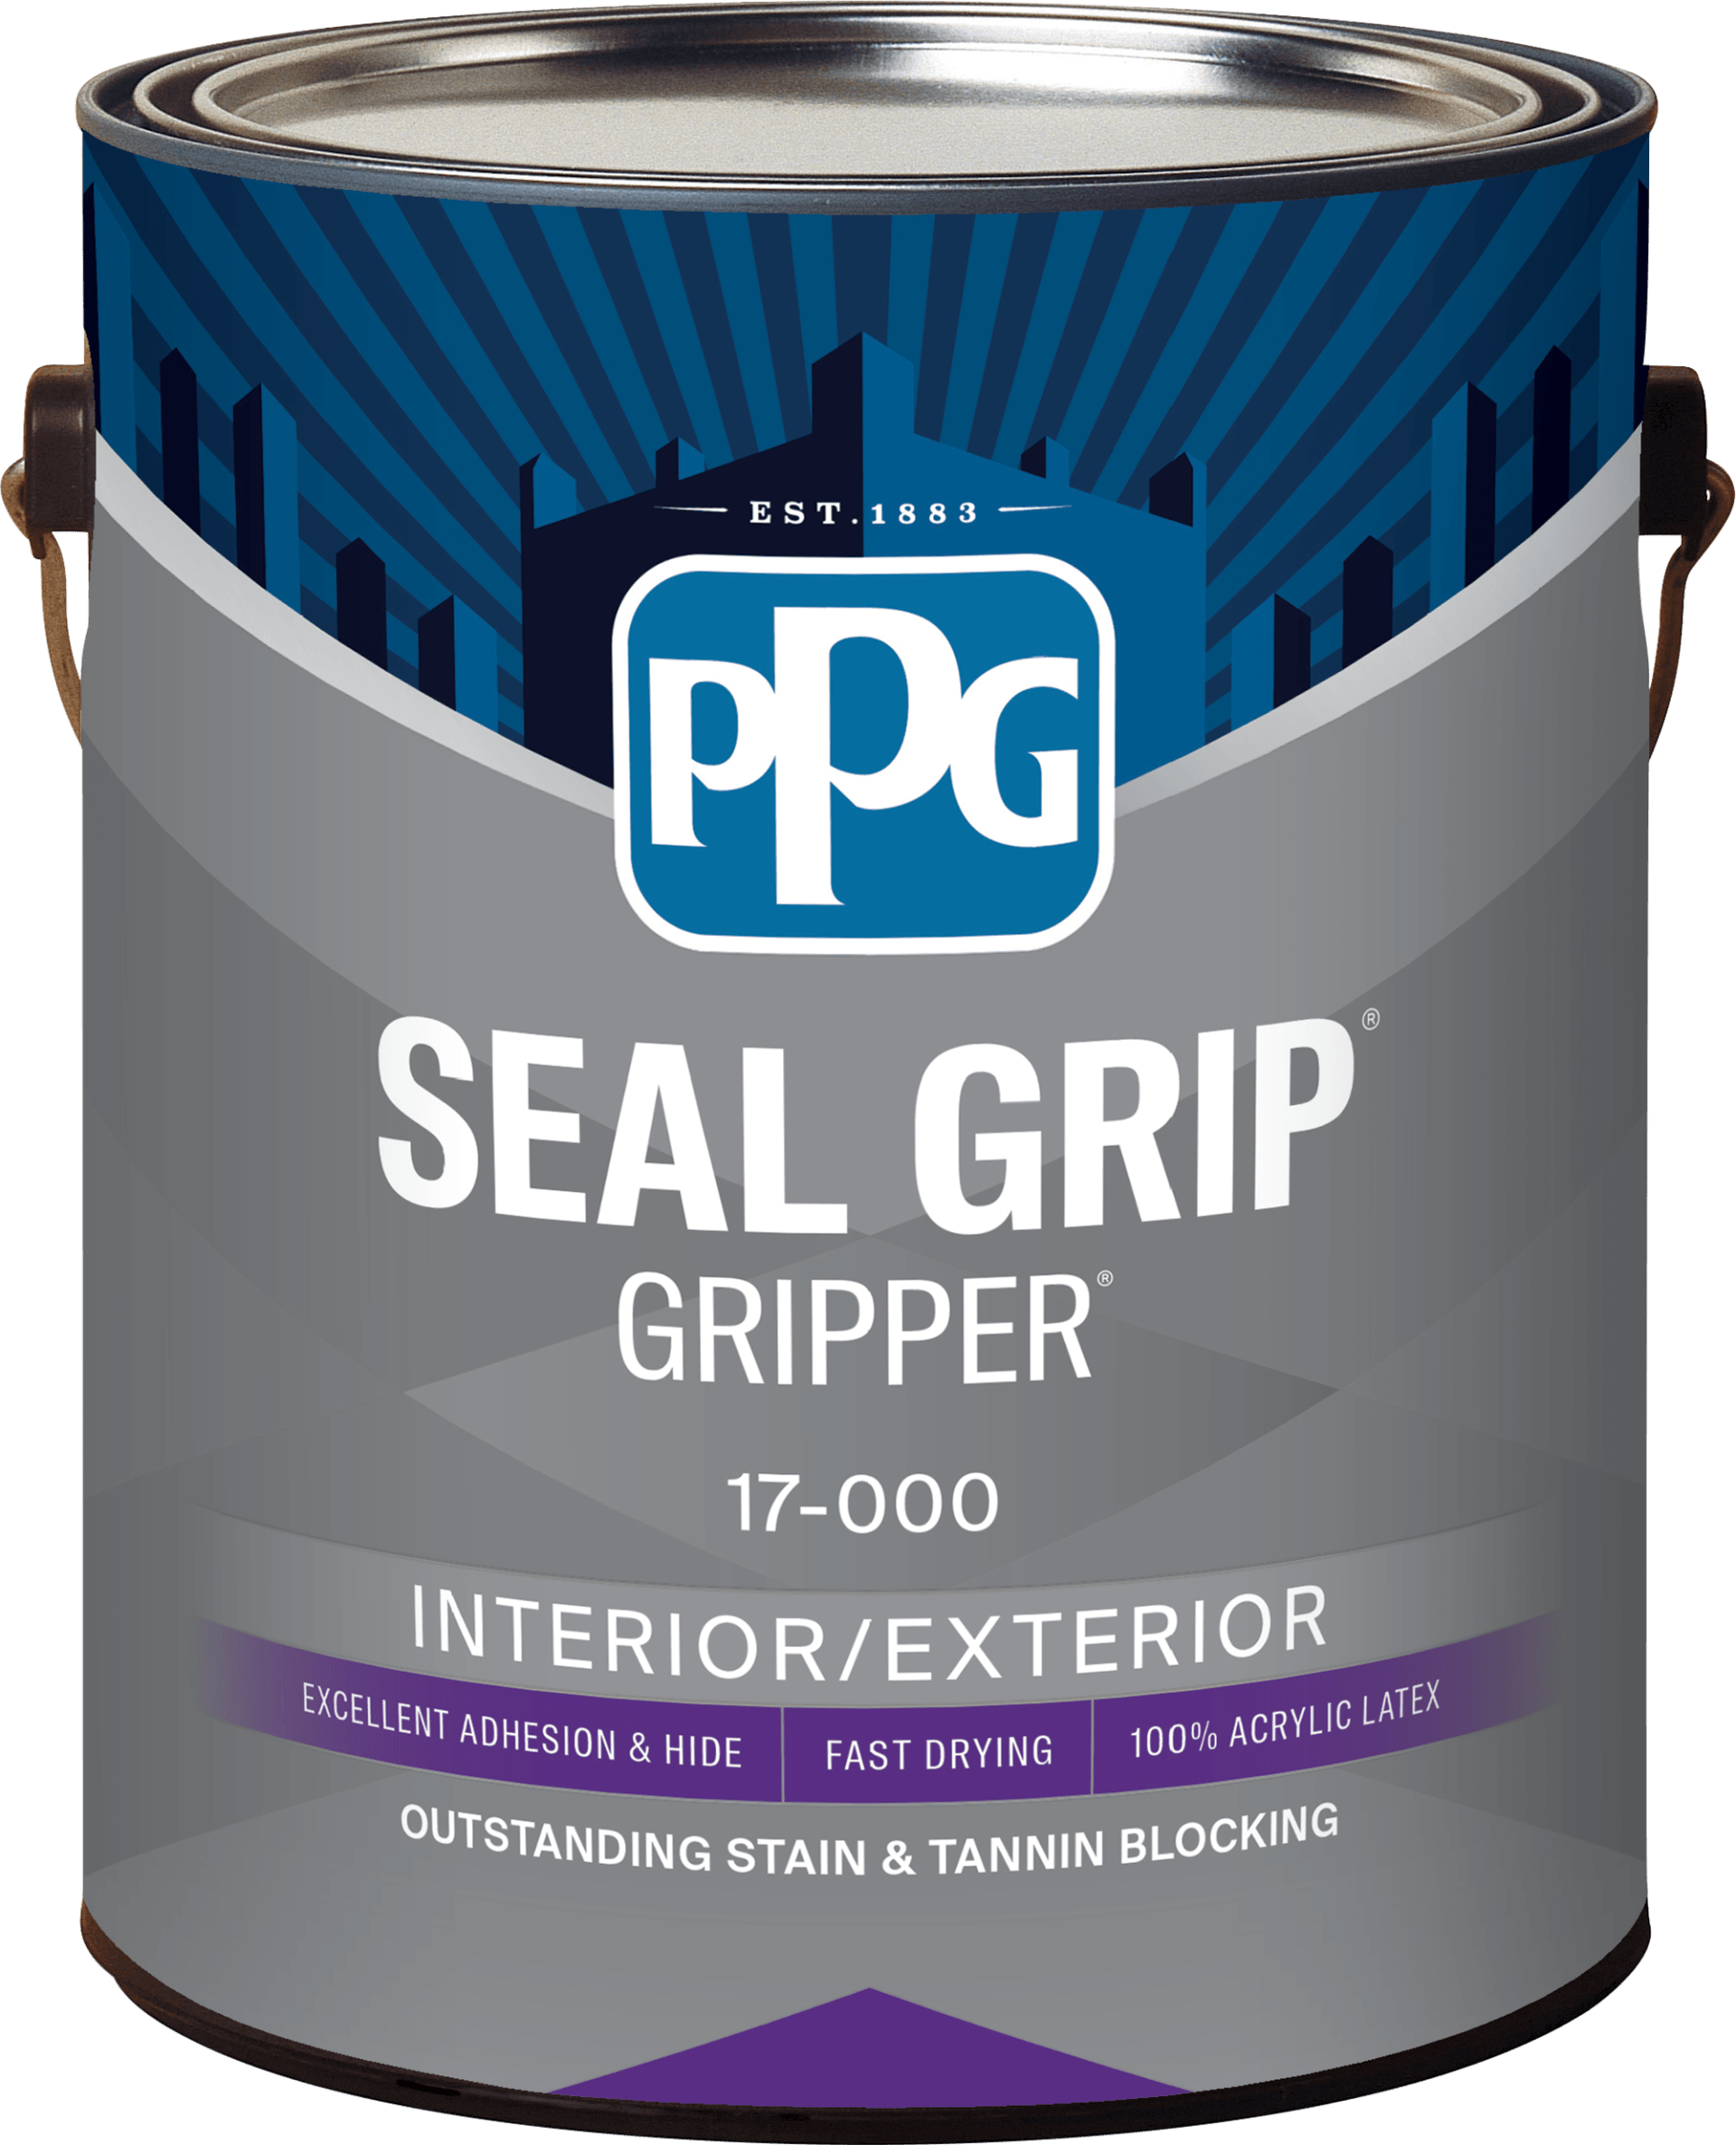 SEAL GRIP® Gripper® Universal Primer/Sealer from PPG at 21st Century Paints near Holland, Ohio (OH)